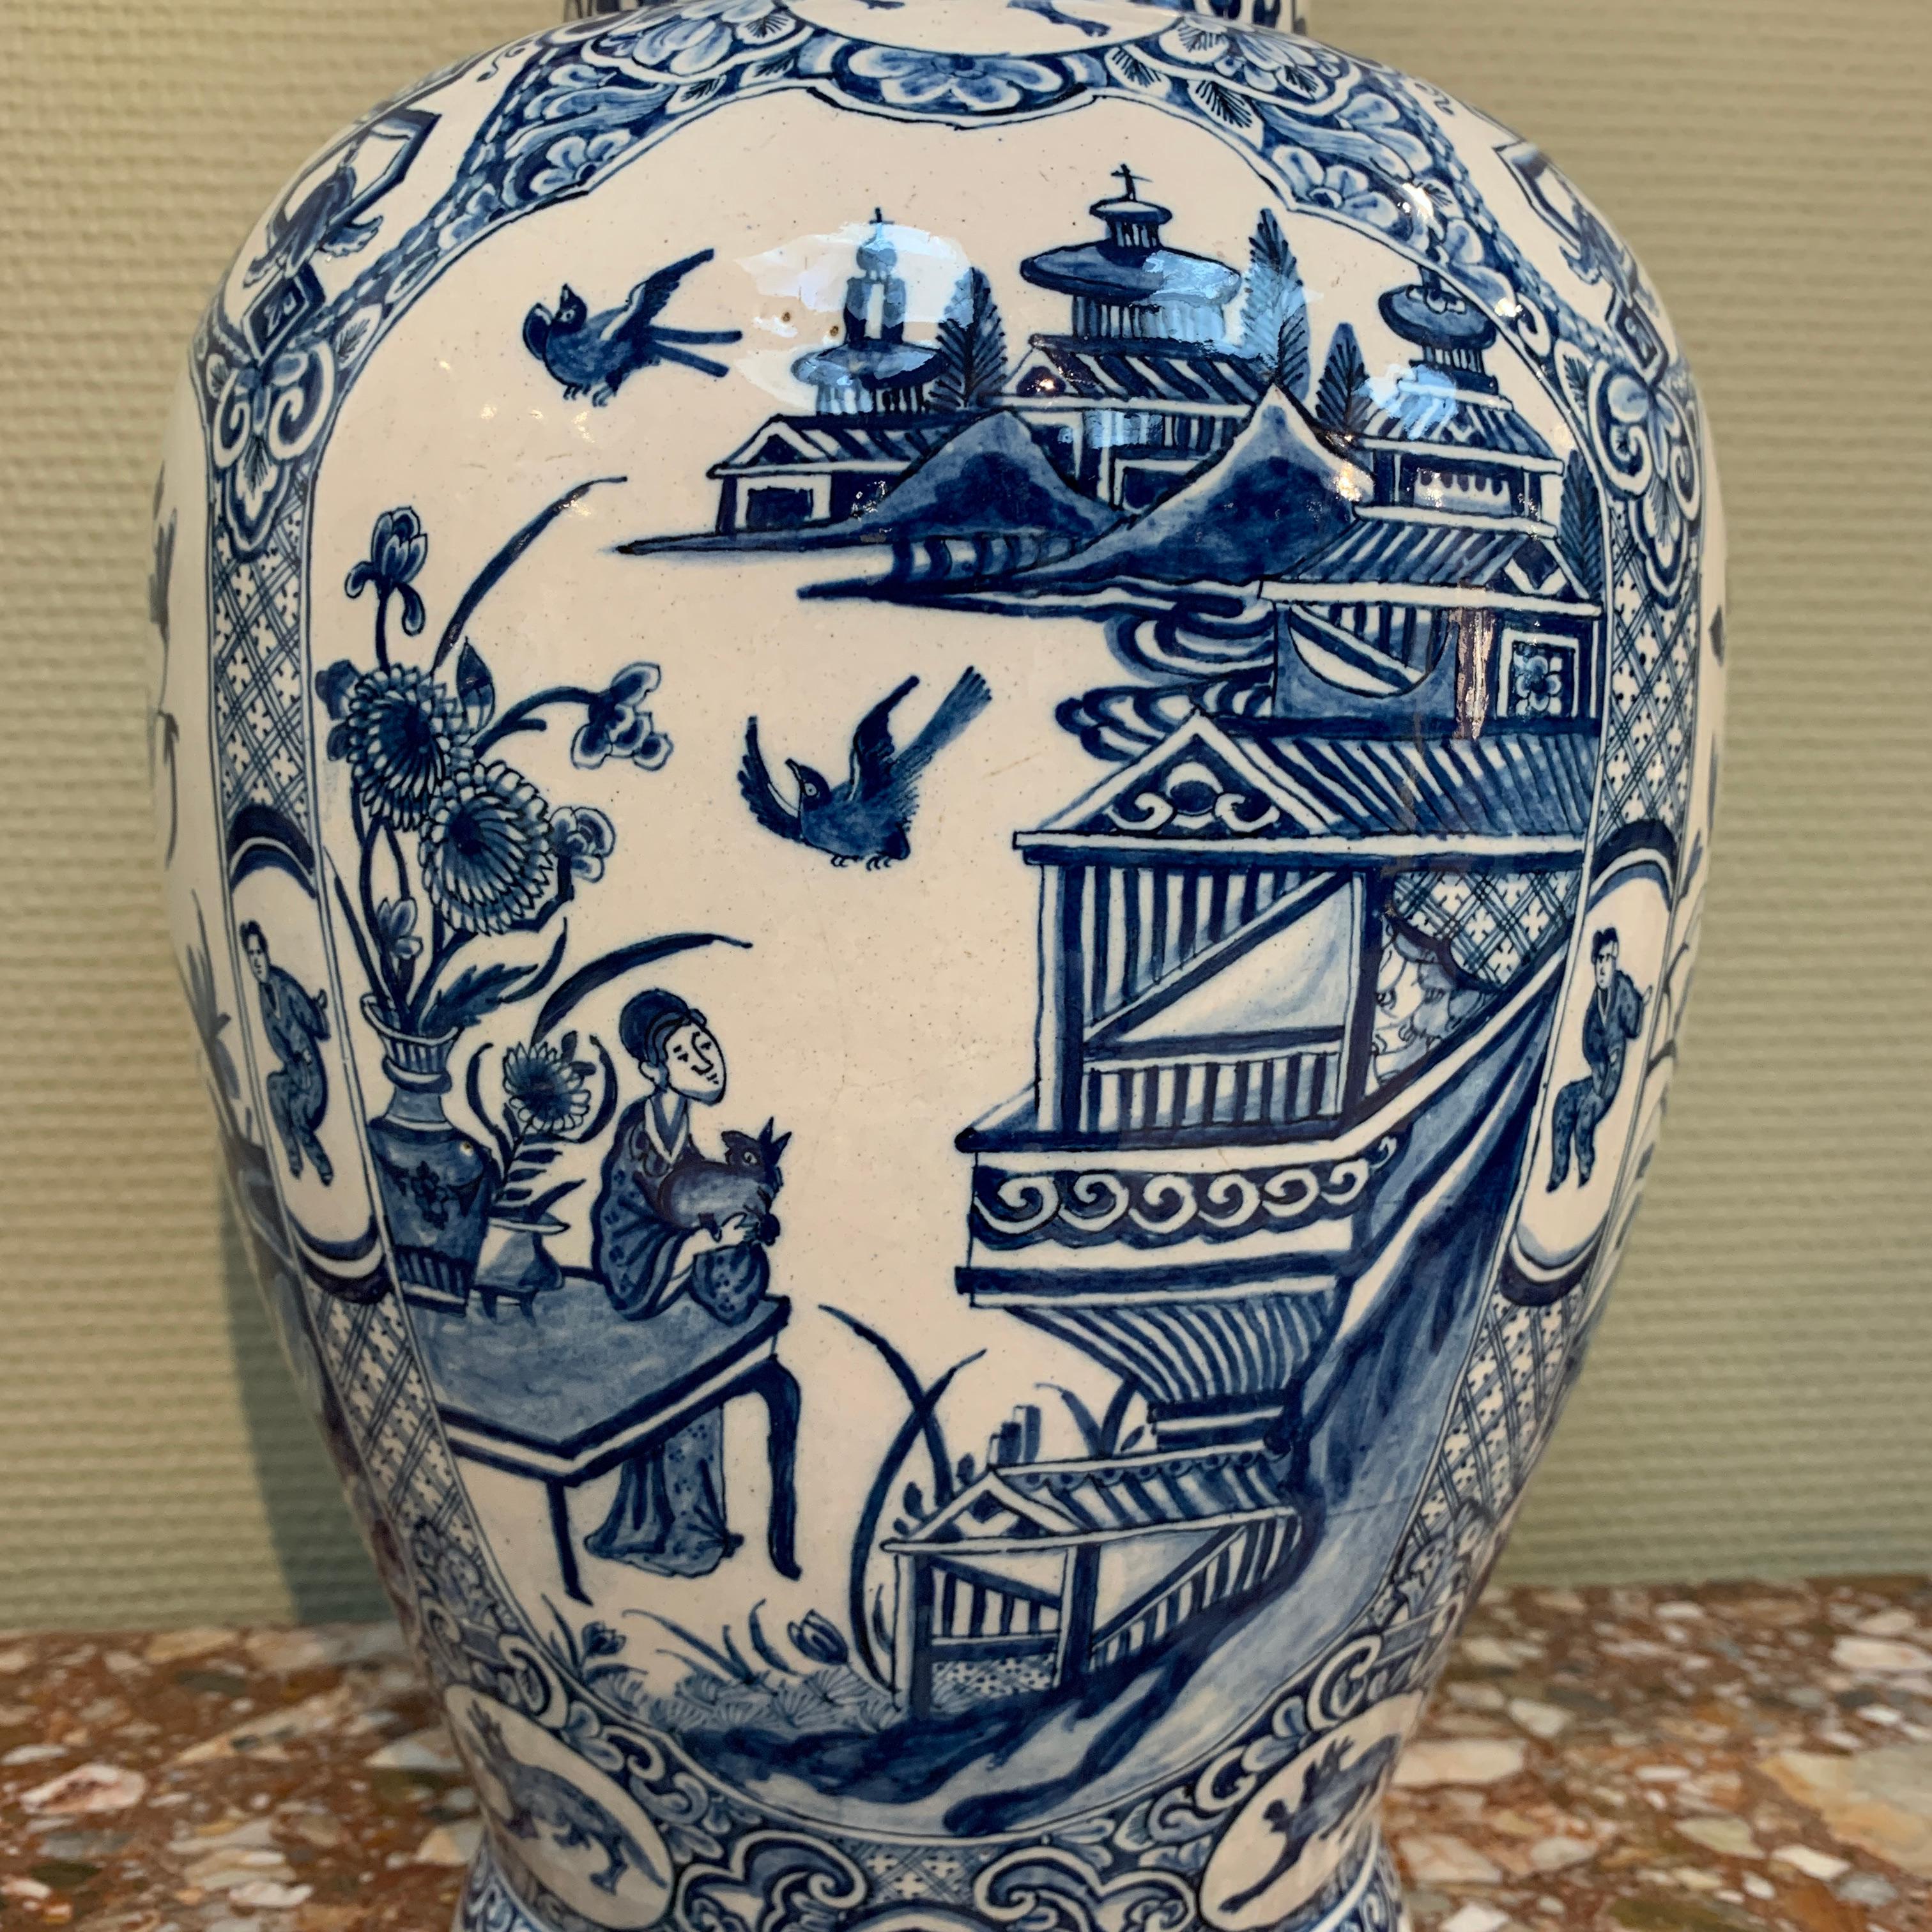 Baroque Large Dutch Delft Blue and White Chinoiserie Vase, Early 18th Century